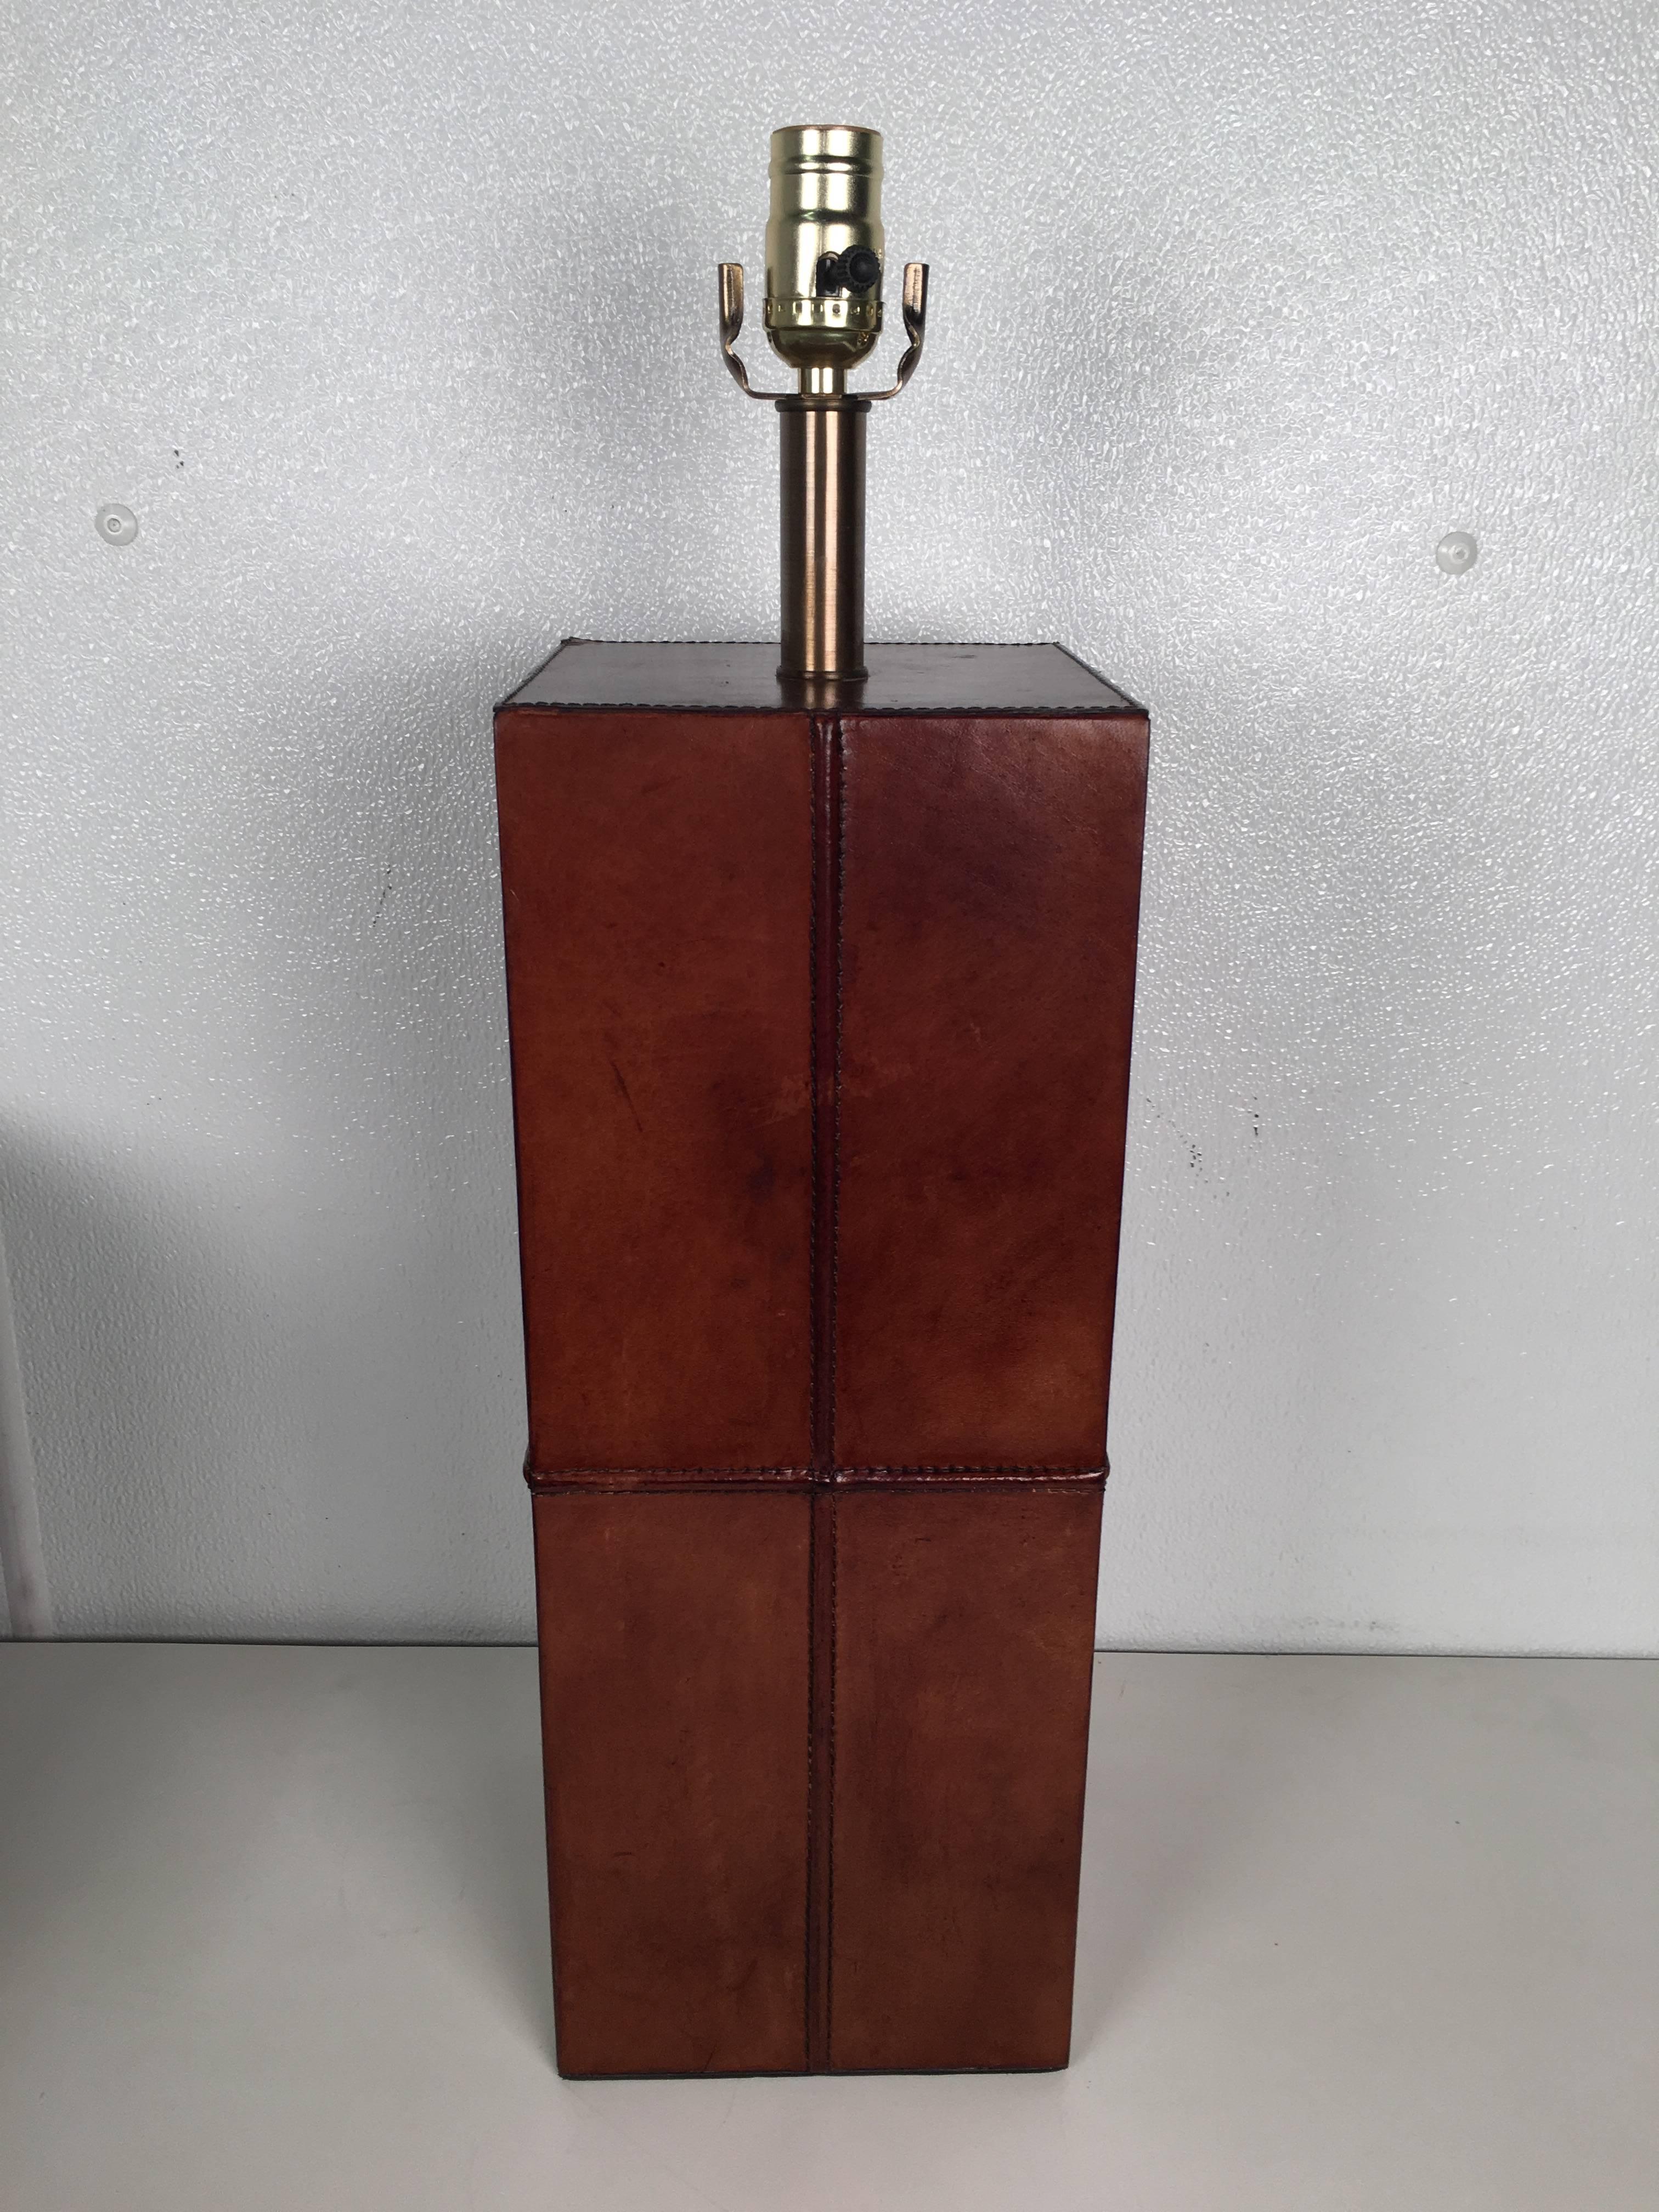 Pair of Stitched Leather Table Lamps For Sale 1